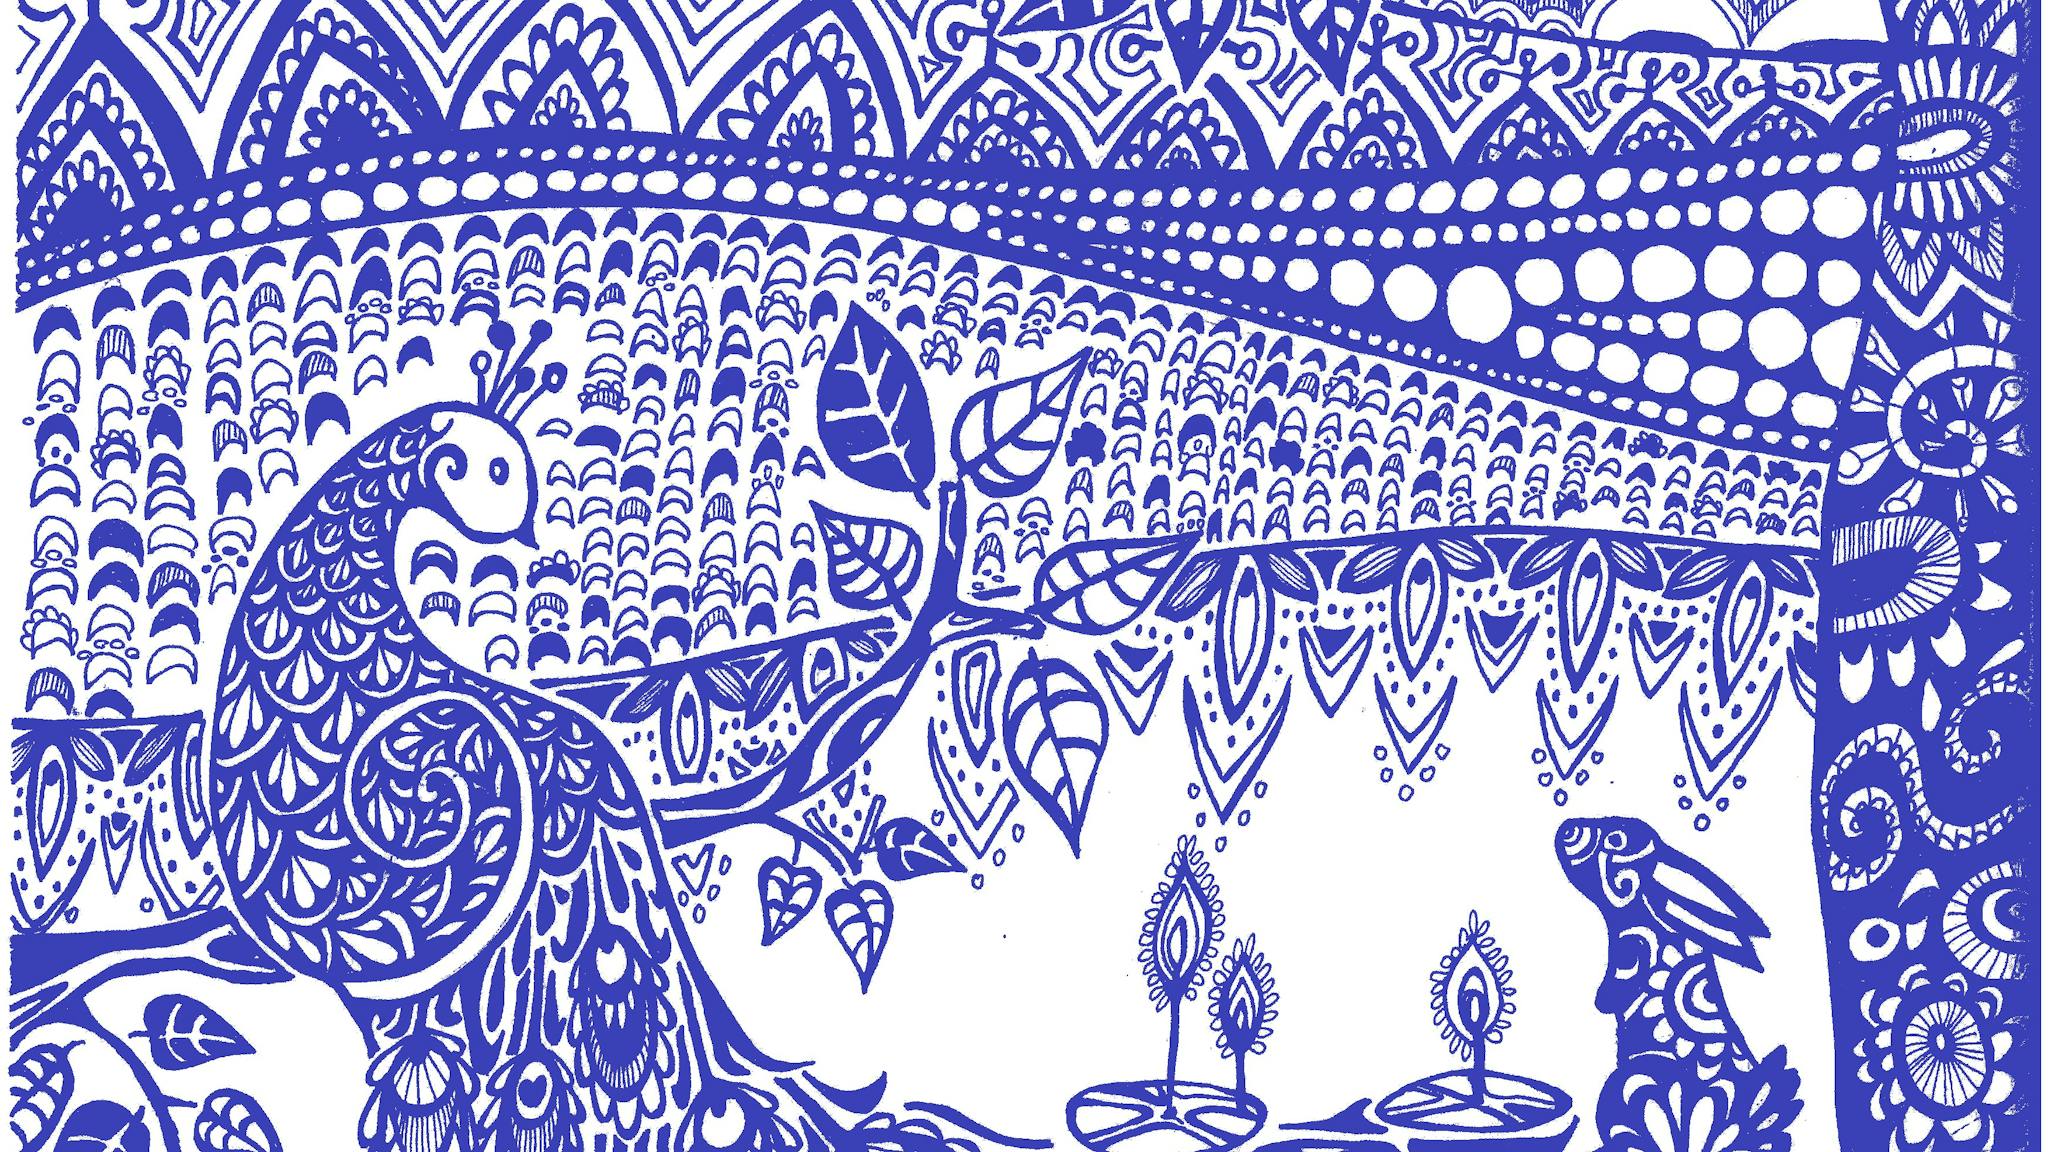 A blue and white line drawing of a landscape featuring a peacock and bunny.